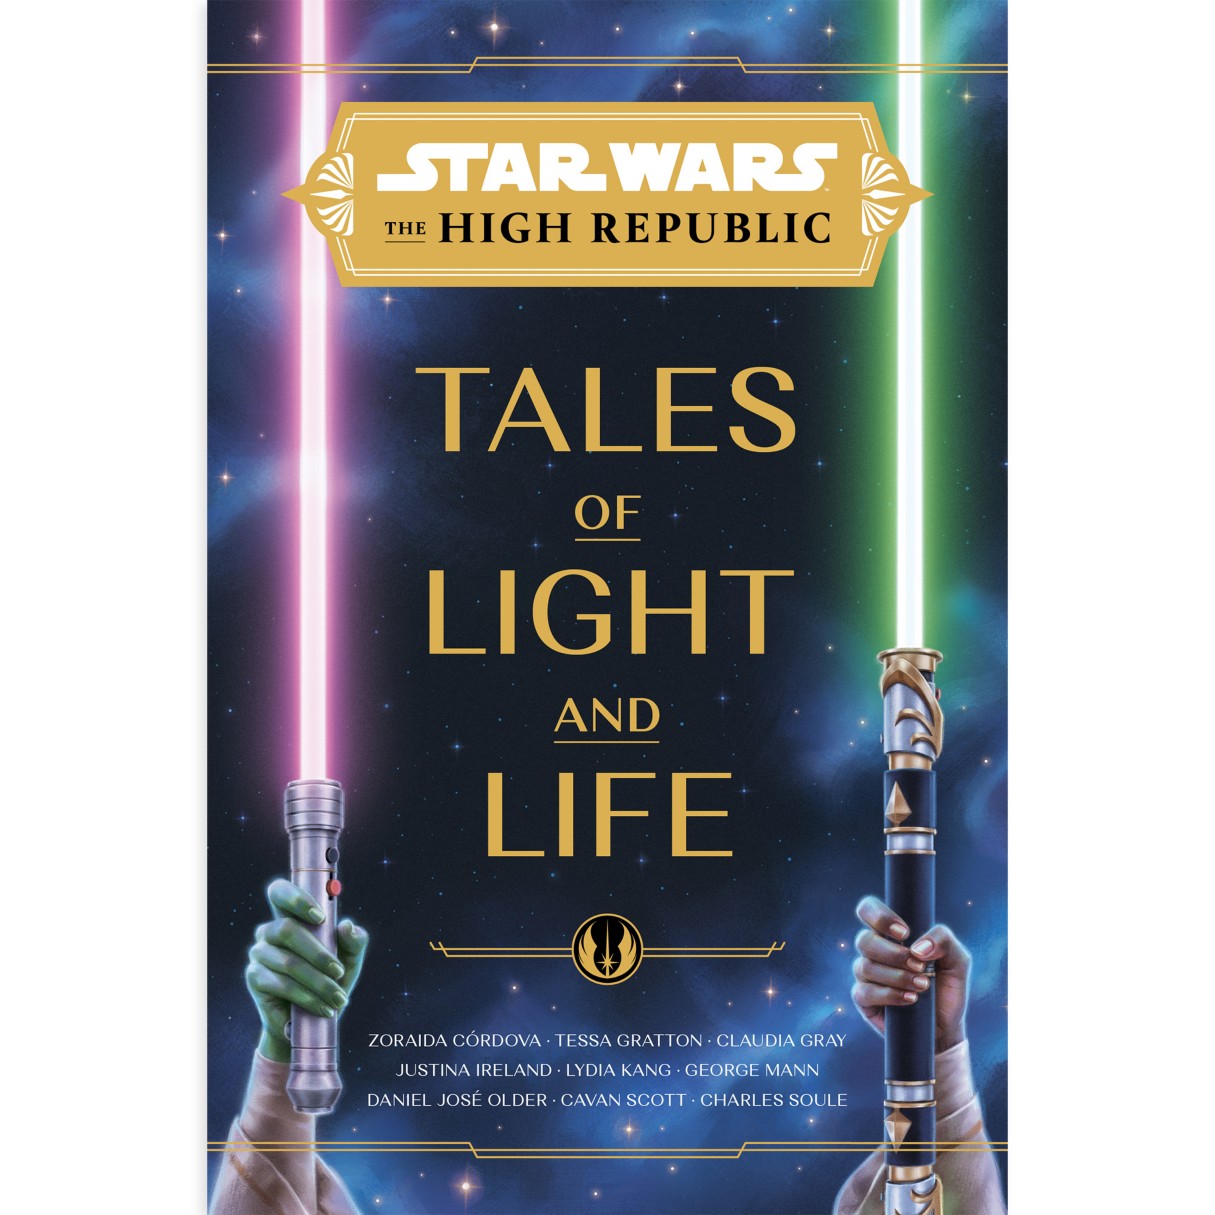 Star Wars The High Republic: Tales of Light and Life Book